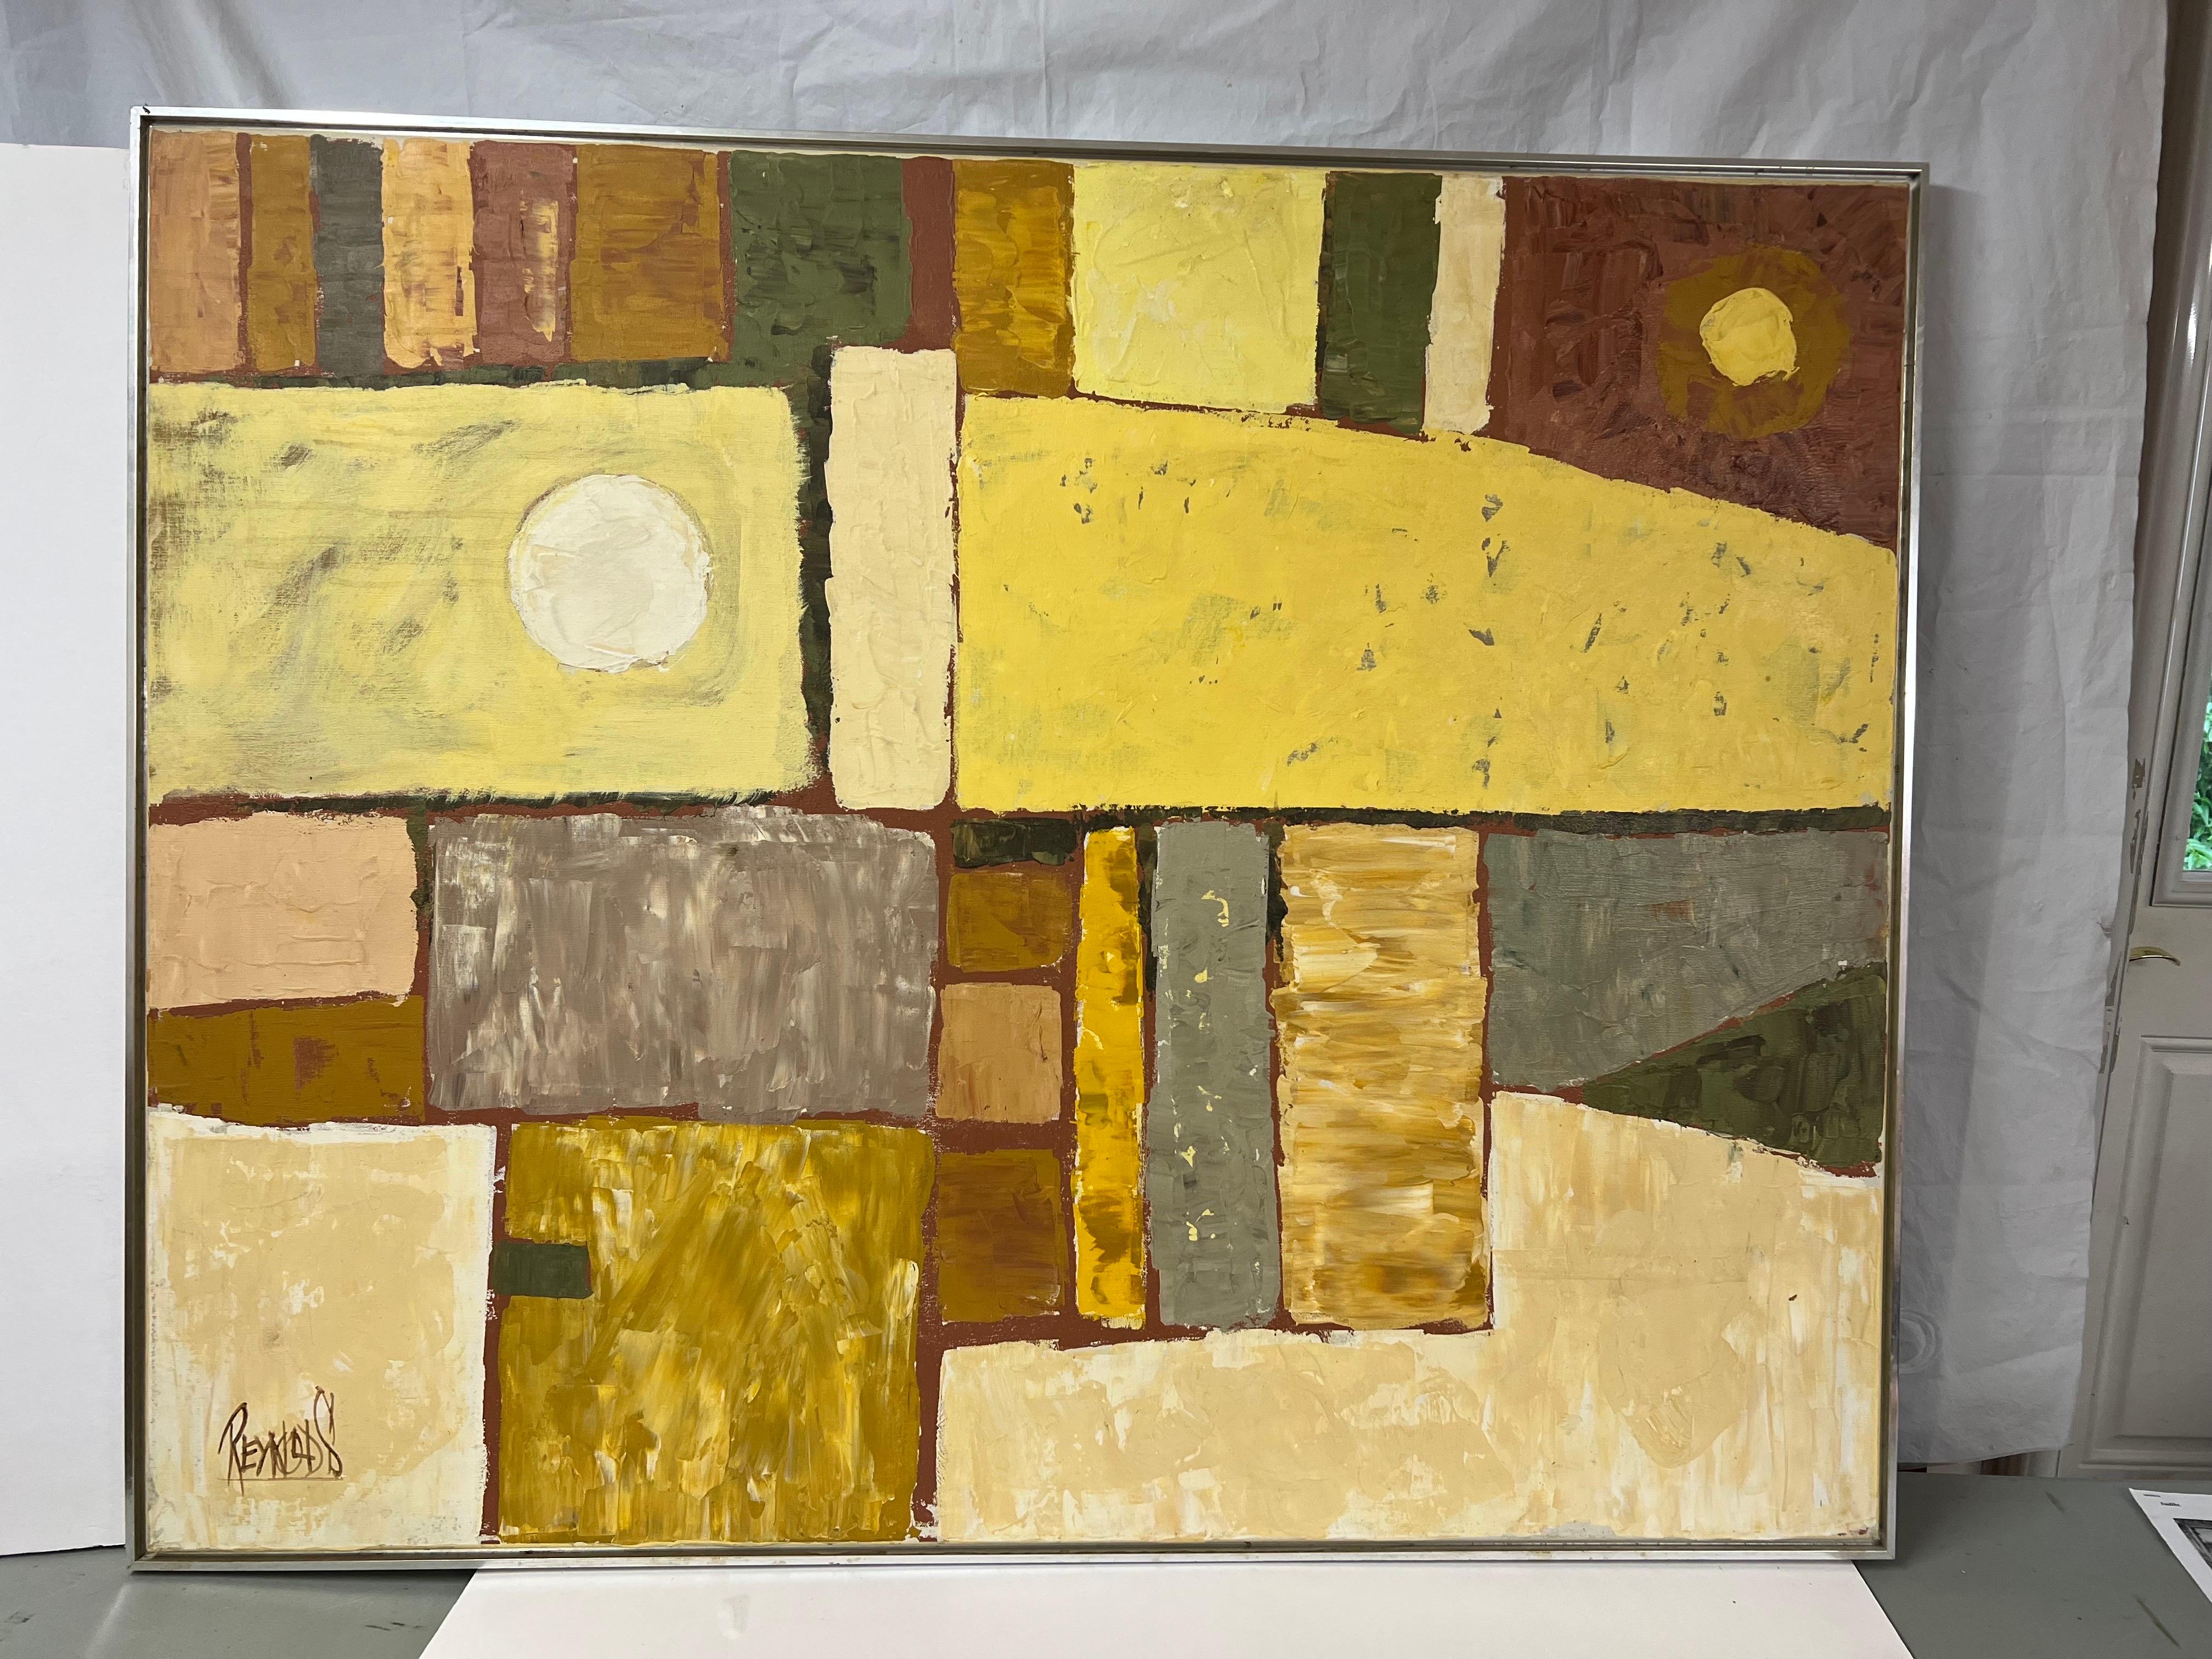 Large Mid Century Lee Reynolds Vanguard studio Painting on canvas. Large abstract composition in yellows, whites and greens with a chrome frame. Signed lower left. Perfect for a large loft space or open modern home. Perfect for that Lee Reynolds